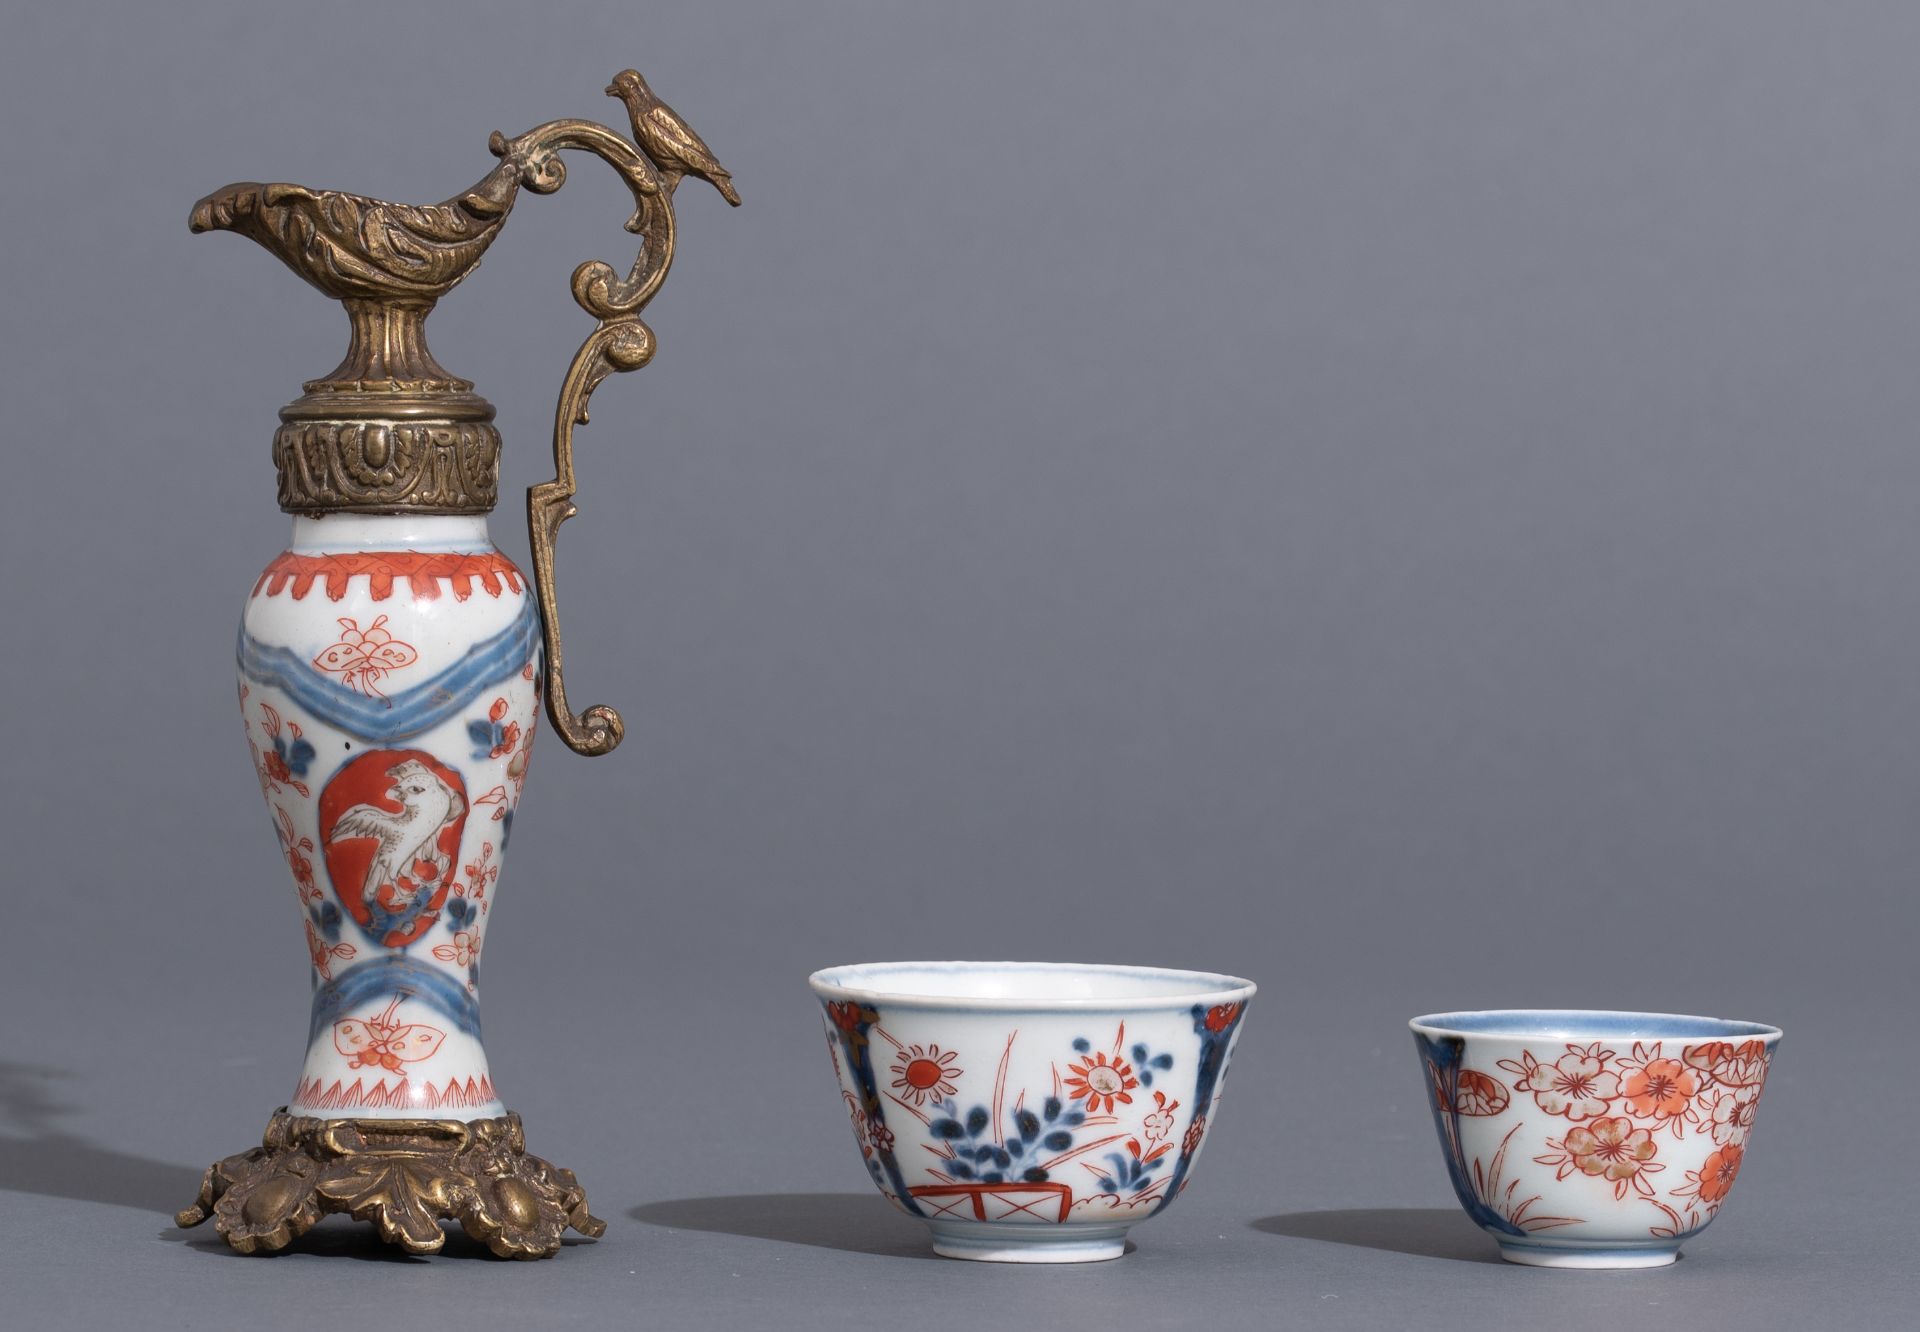 A collection of Chinese and Japanese porcelain items, 18th / 19th / 20thC, H 4 - 47 - ø 10,5 - 23 cm - Image 8 of 19